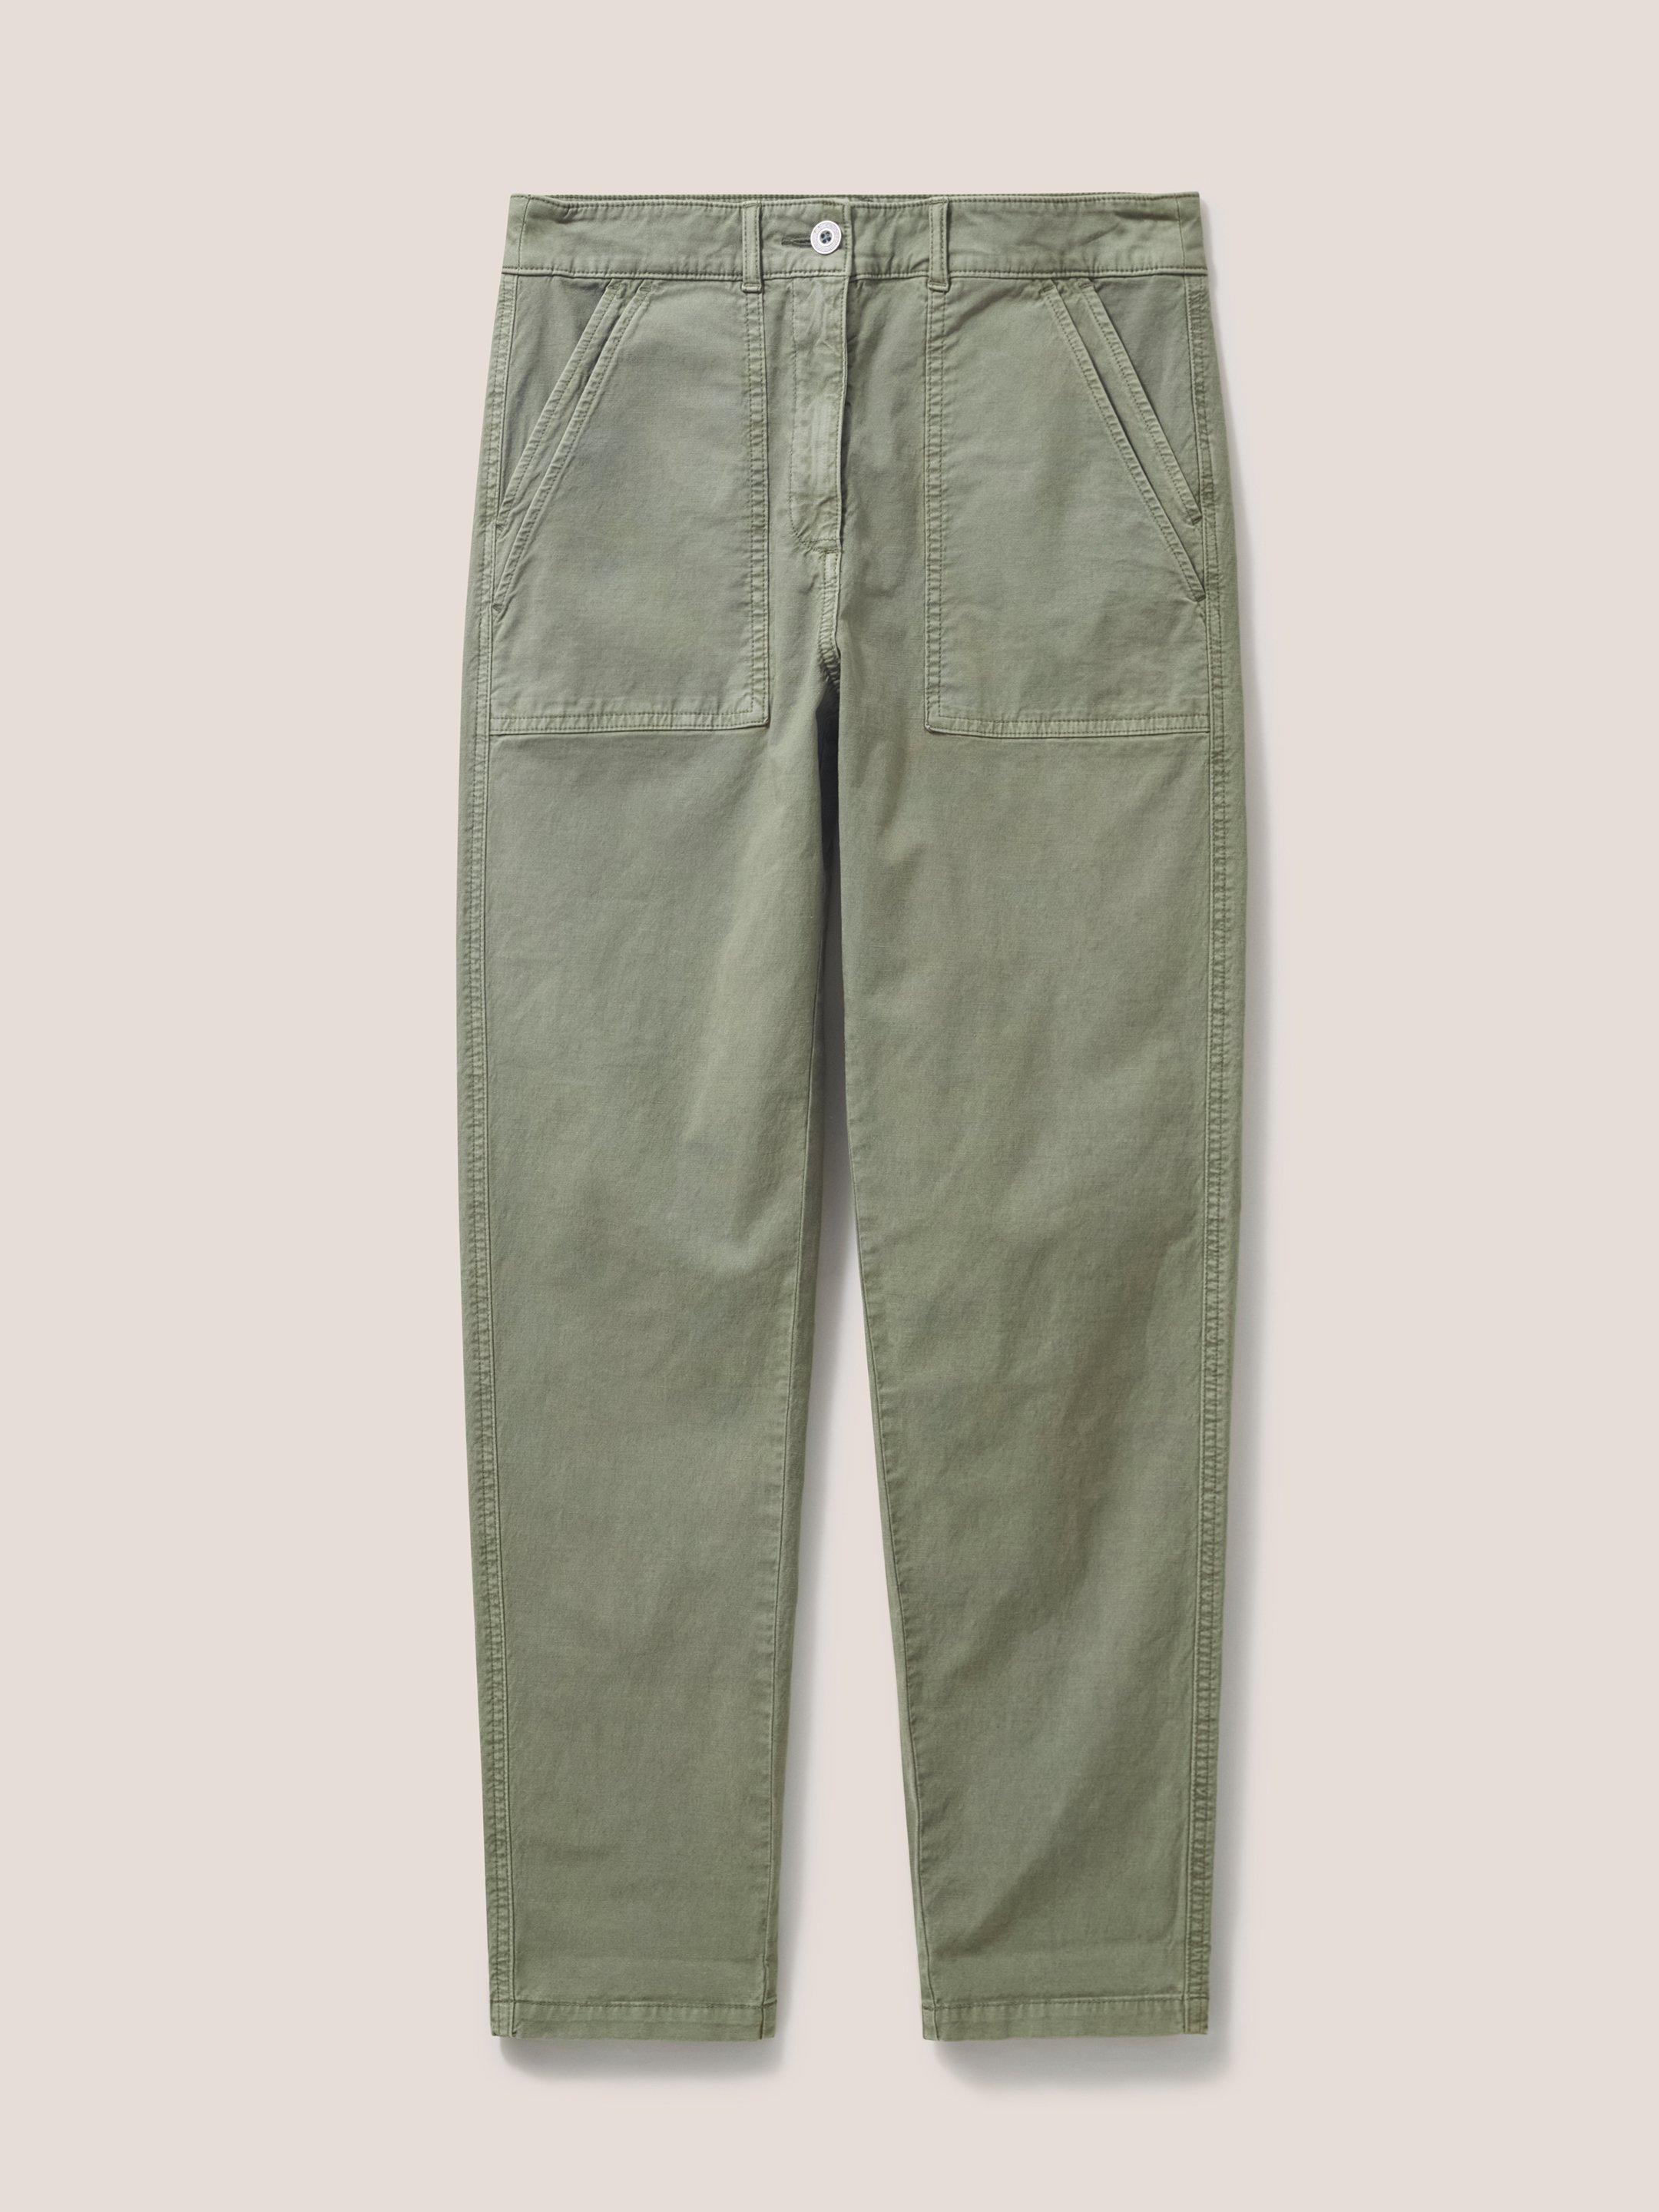 Twister Chino in MID GREEN - FLAT FRONT